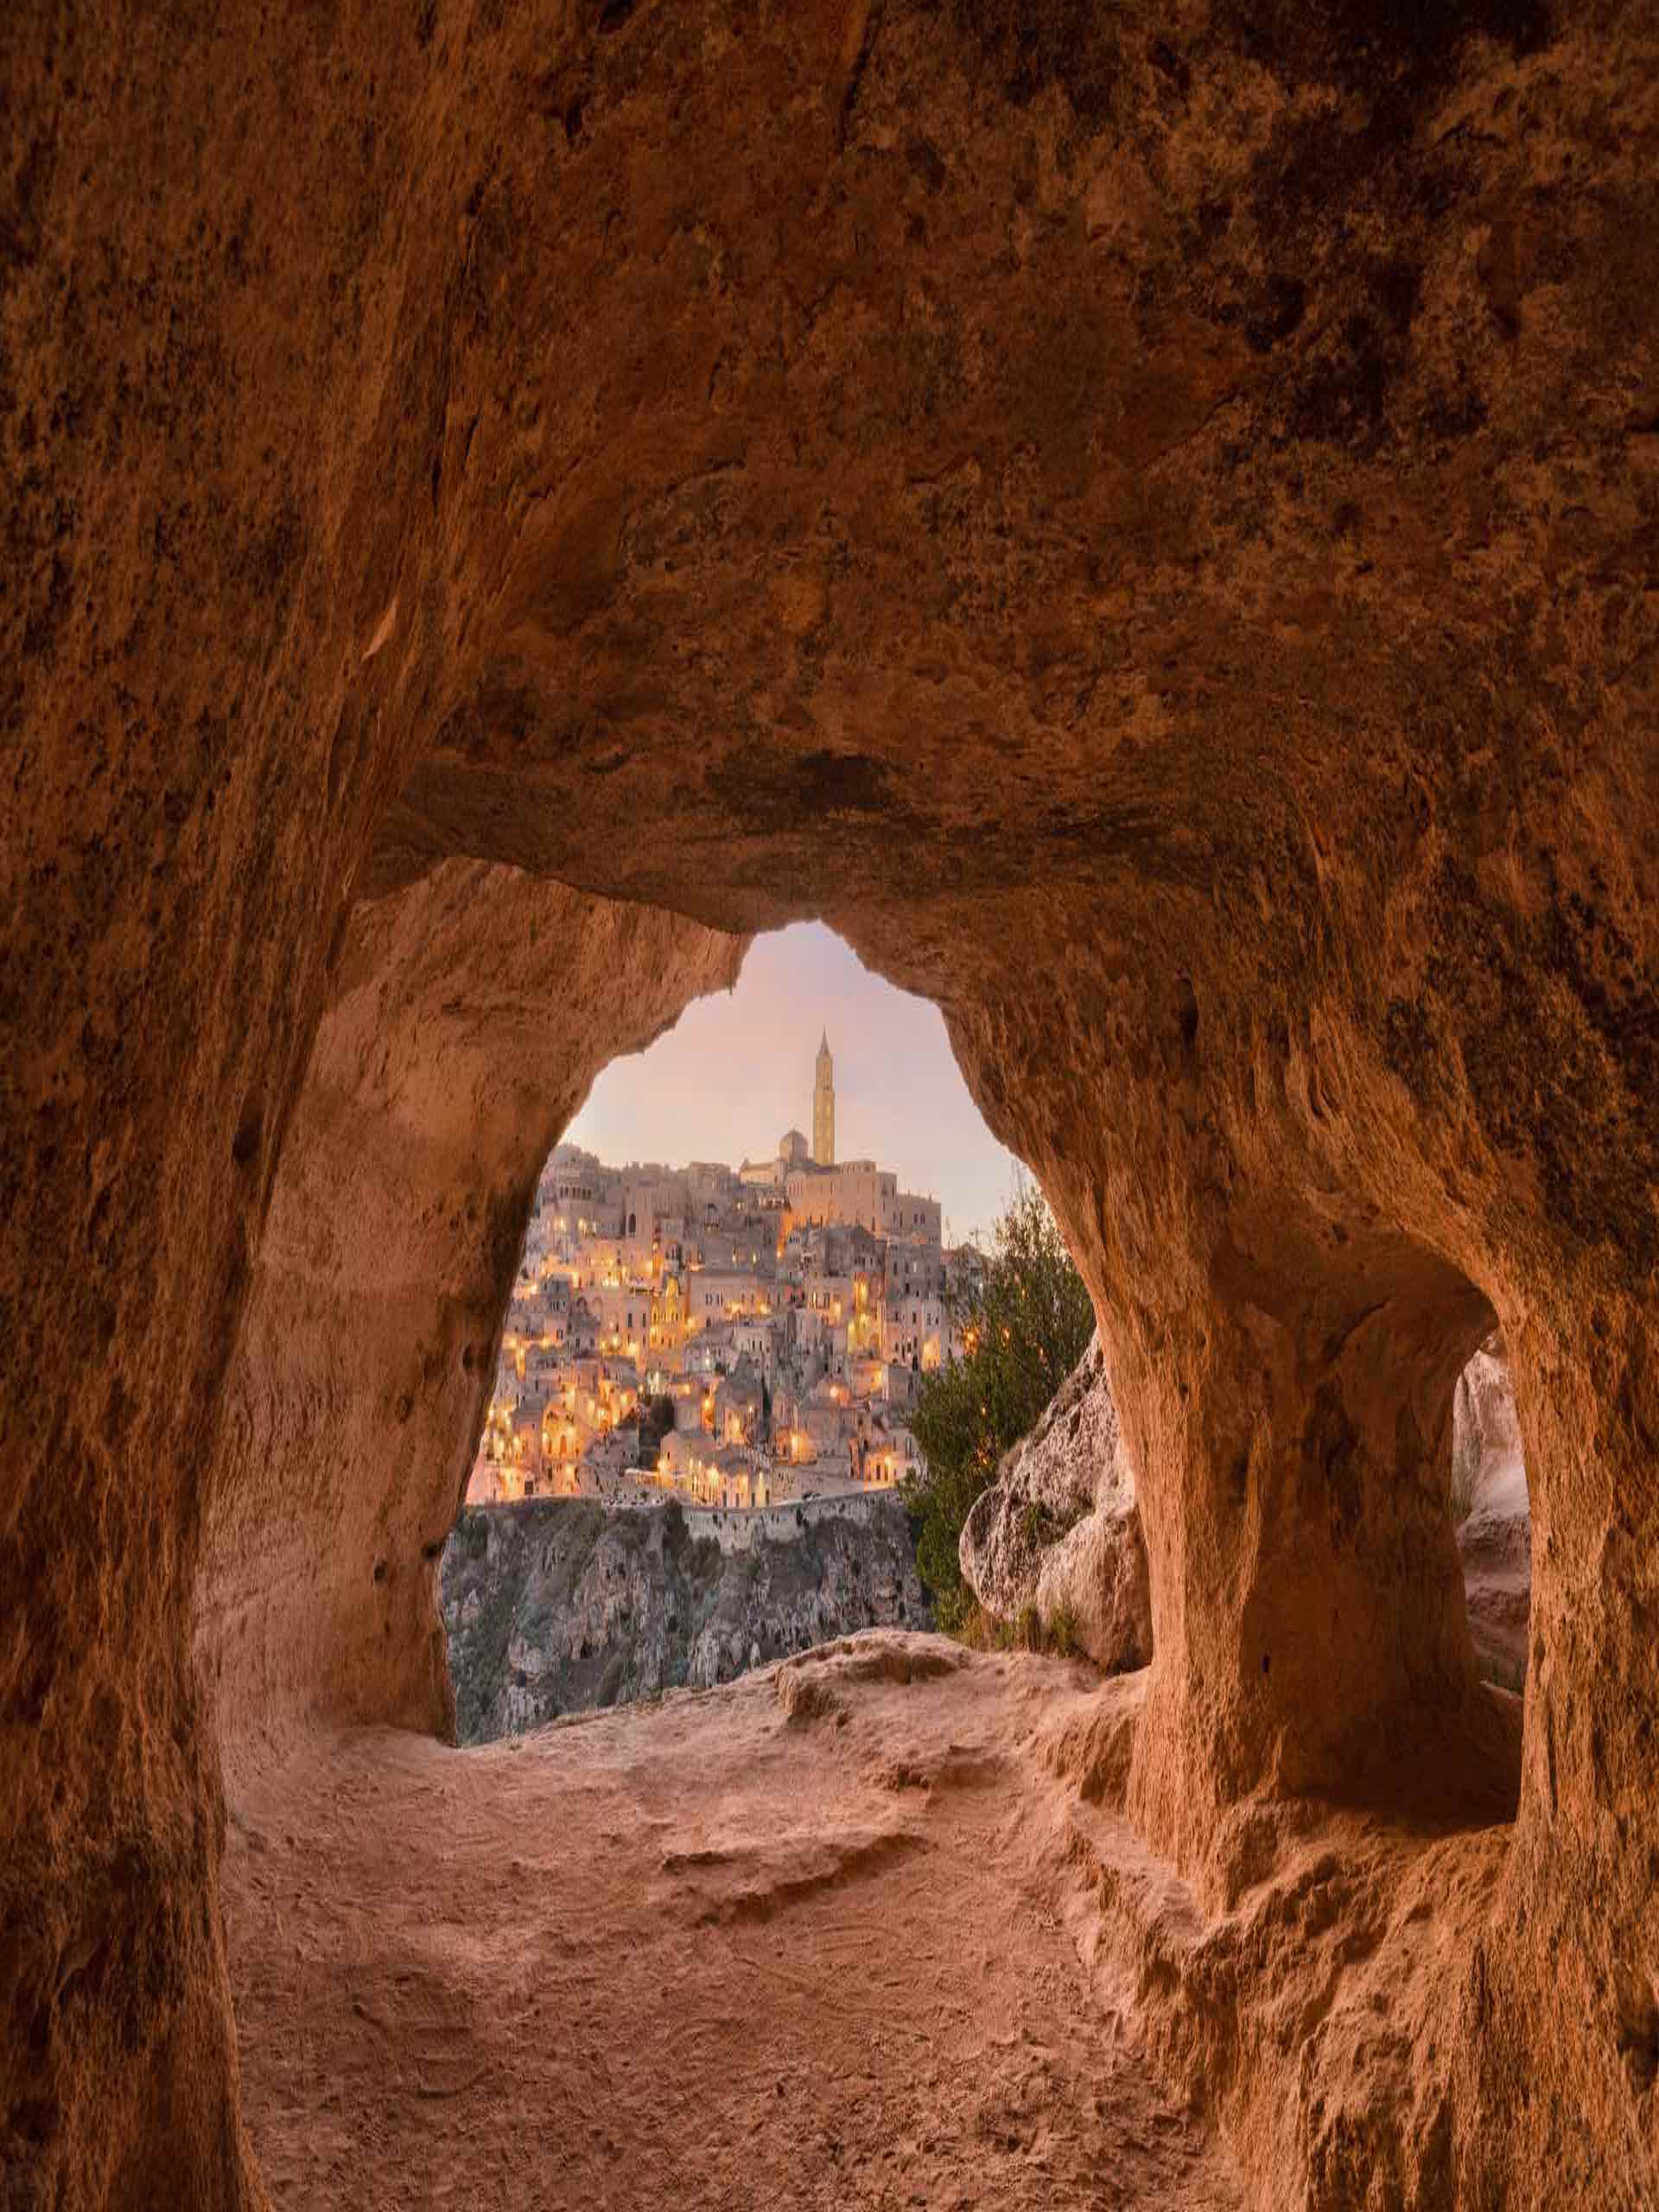 Matera, Italy as seen from within an ancient cave at dusk featured image